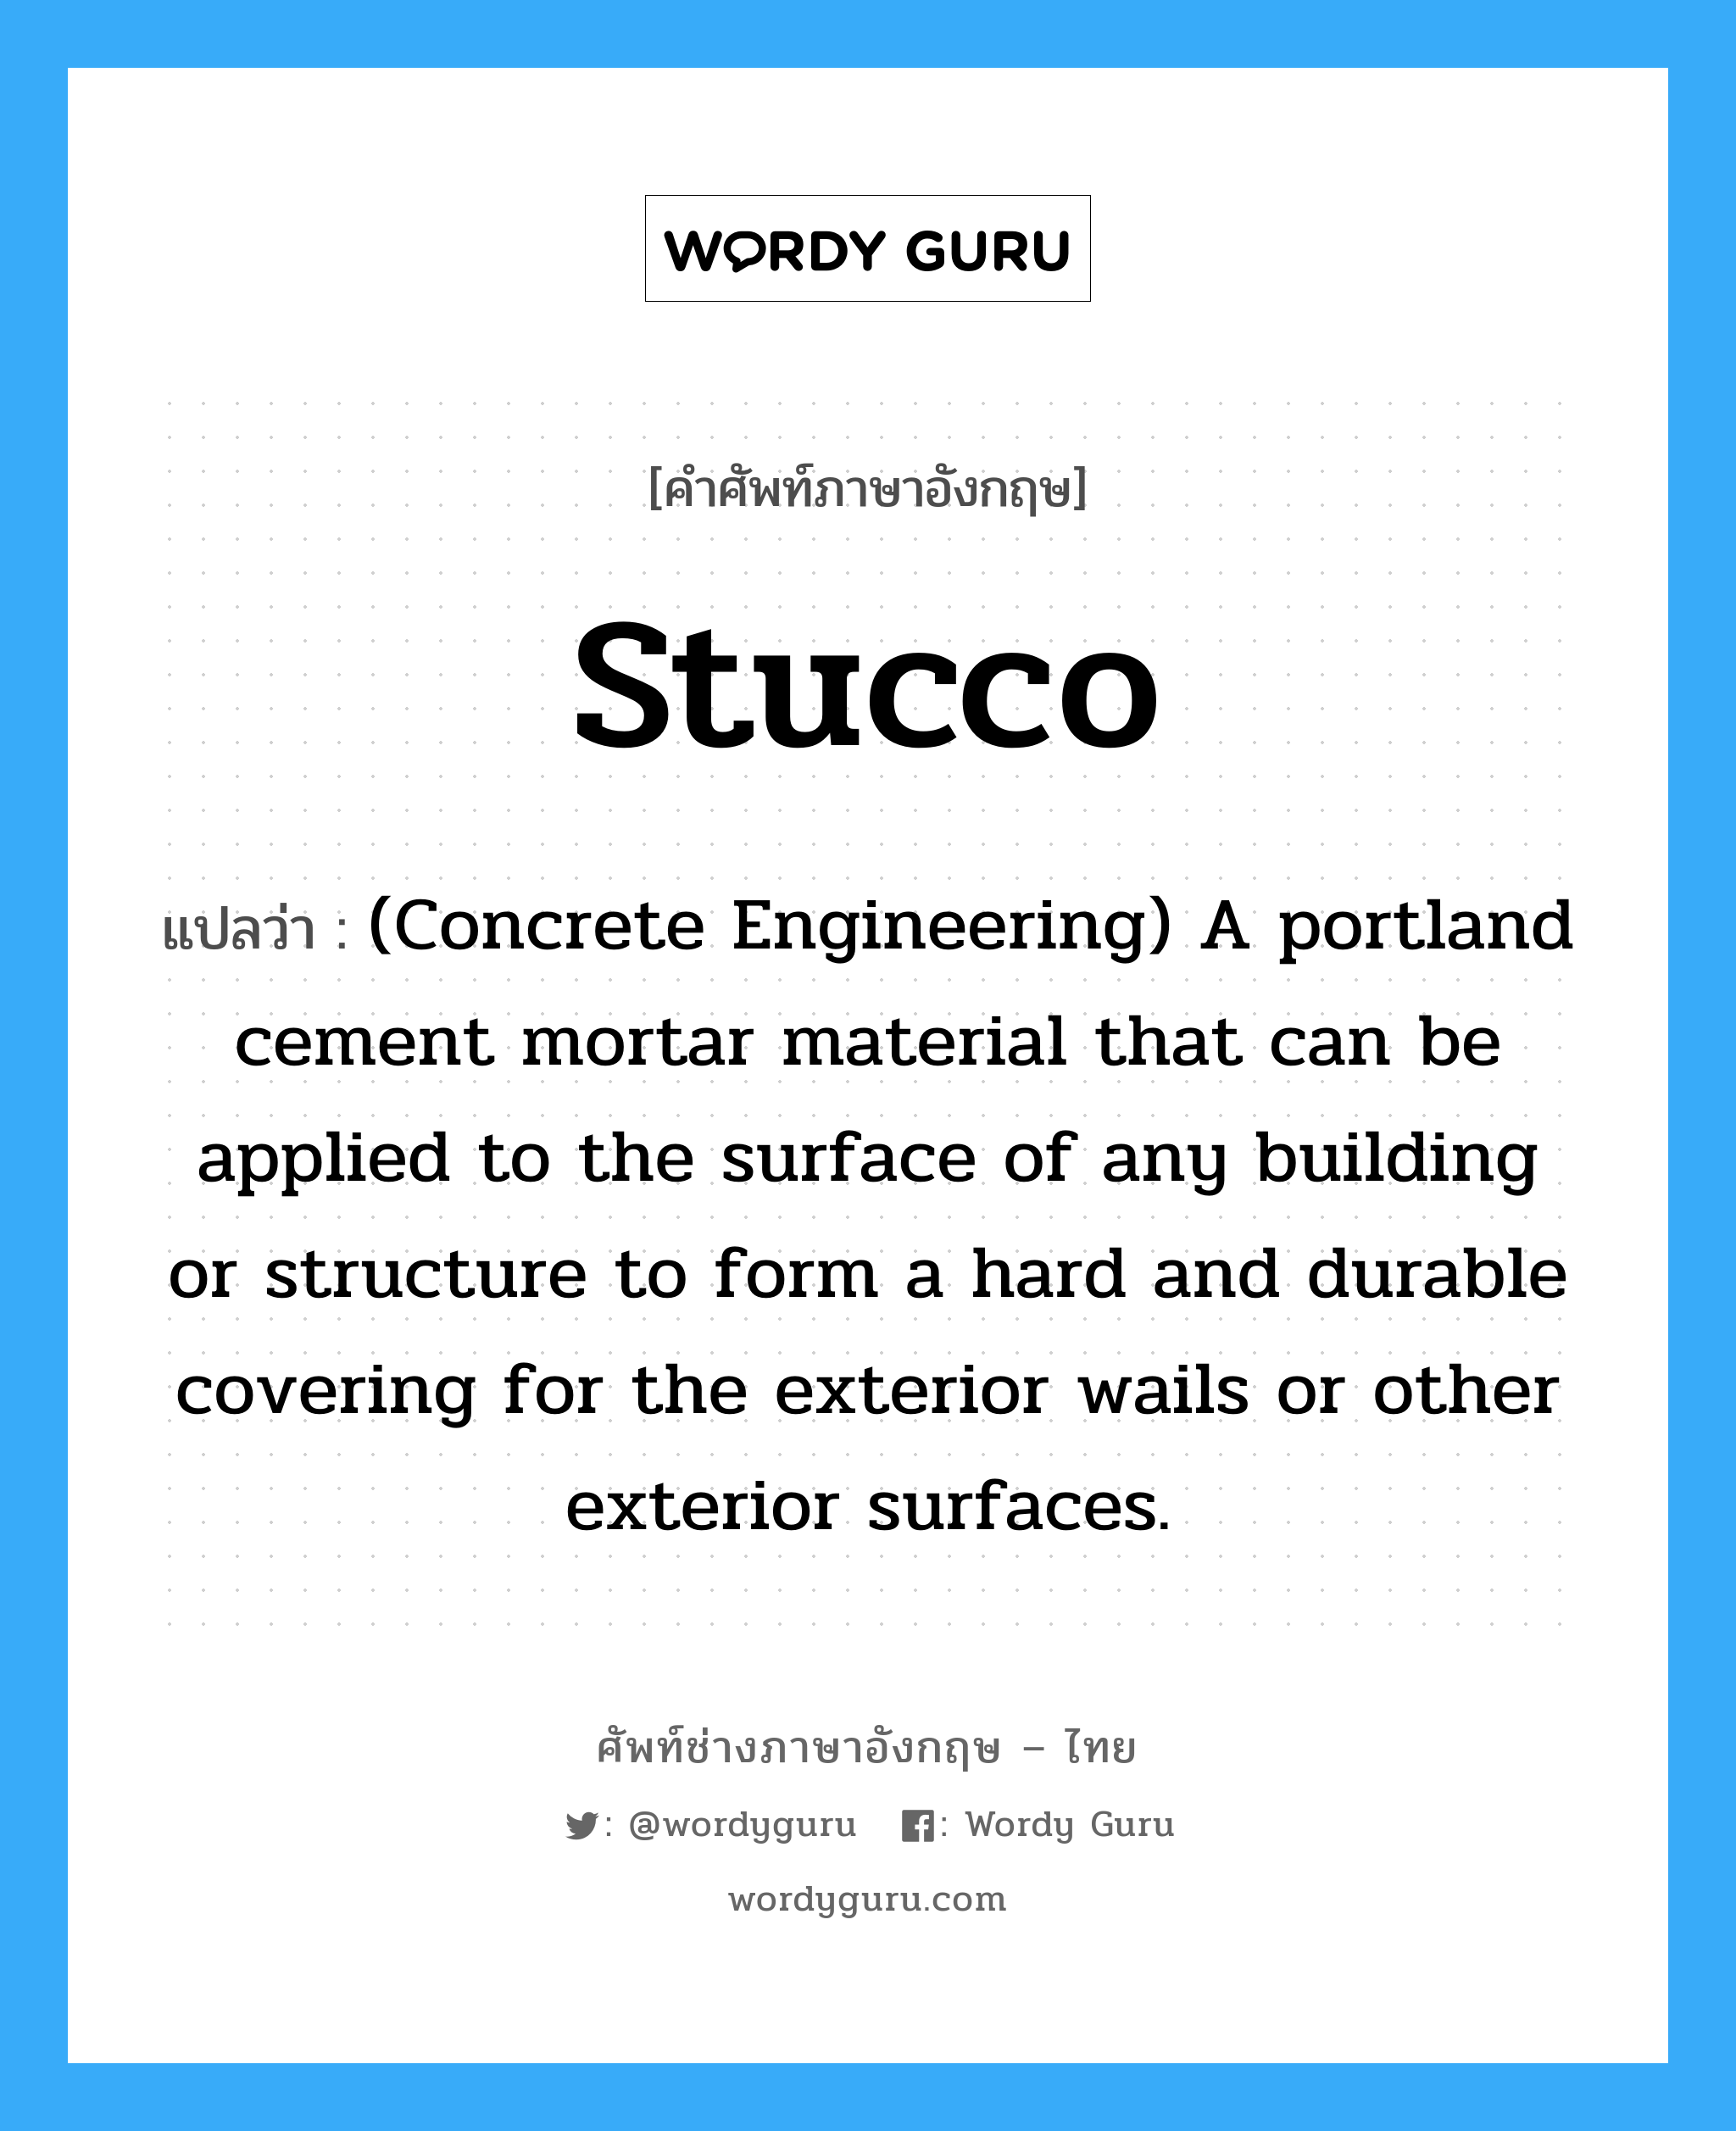 Stucco แปลว่า?, คำศัพท์ช่างภาษาอังกฤษ - ไทย Stucco คำศัพท์ภาษาอังกฤษ Stucco แปลว่า (Concrete Engineering) A portland cement mortar material that can be applied to the surface of any building or structure to form a hard and durable covering for the exterior wails or other exterior surfaces.